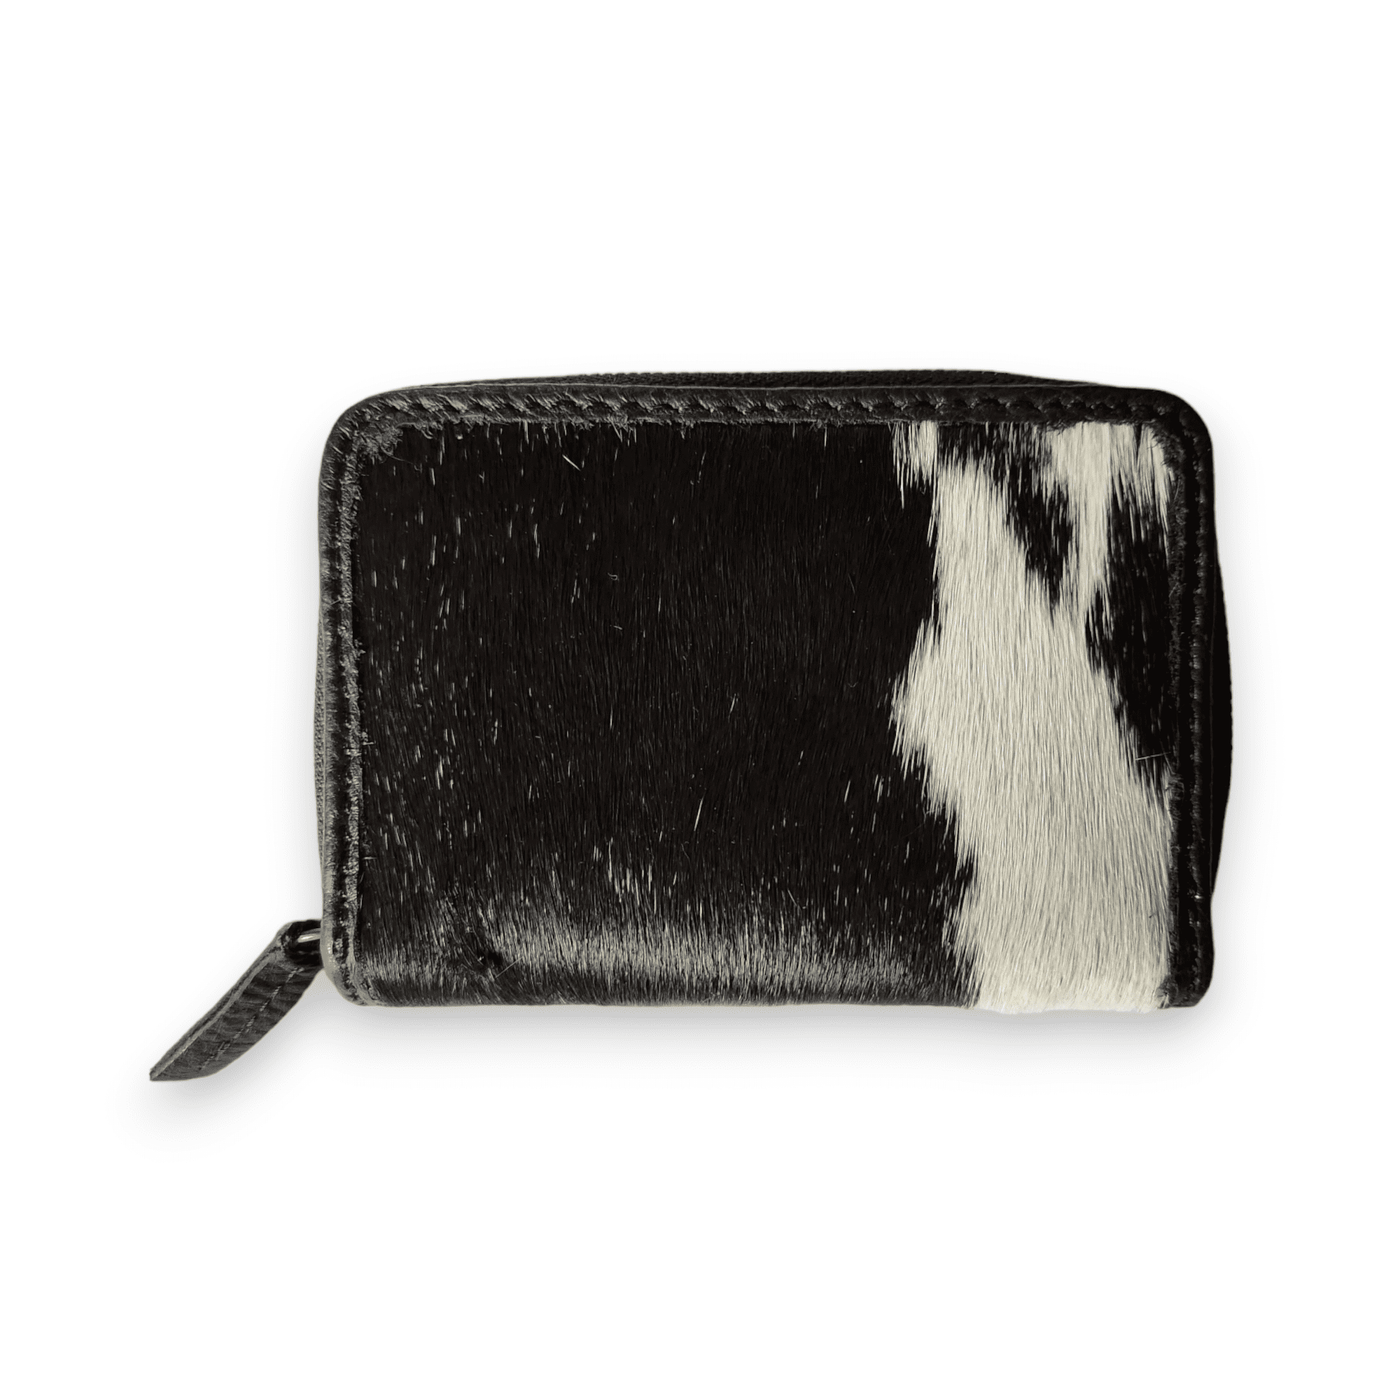 The Highlands Credit Card Wallet Cowhide Wallet Small Leather Wallet - Ranch Junkie Mercantile LLC